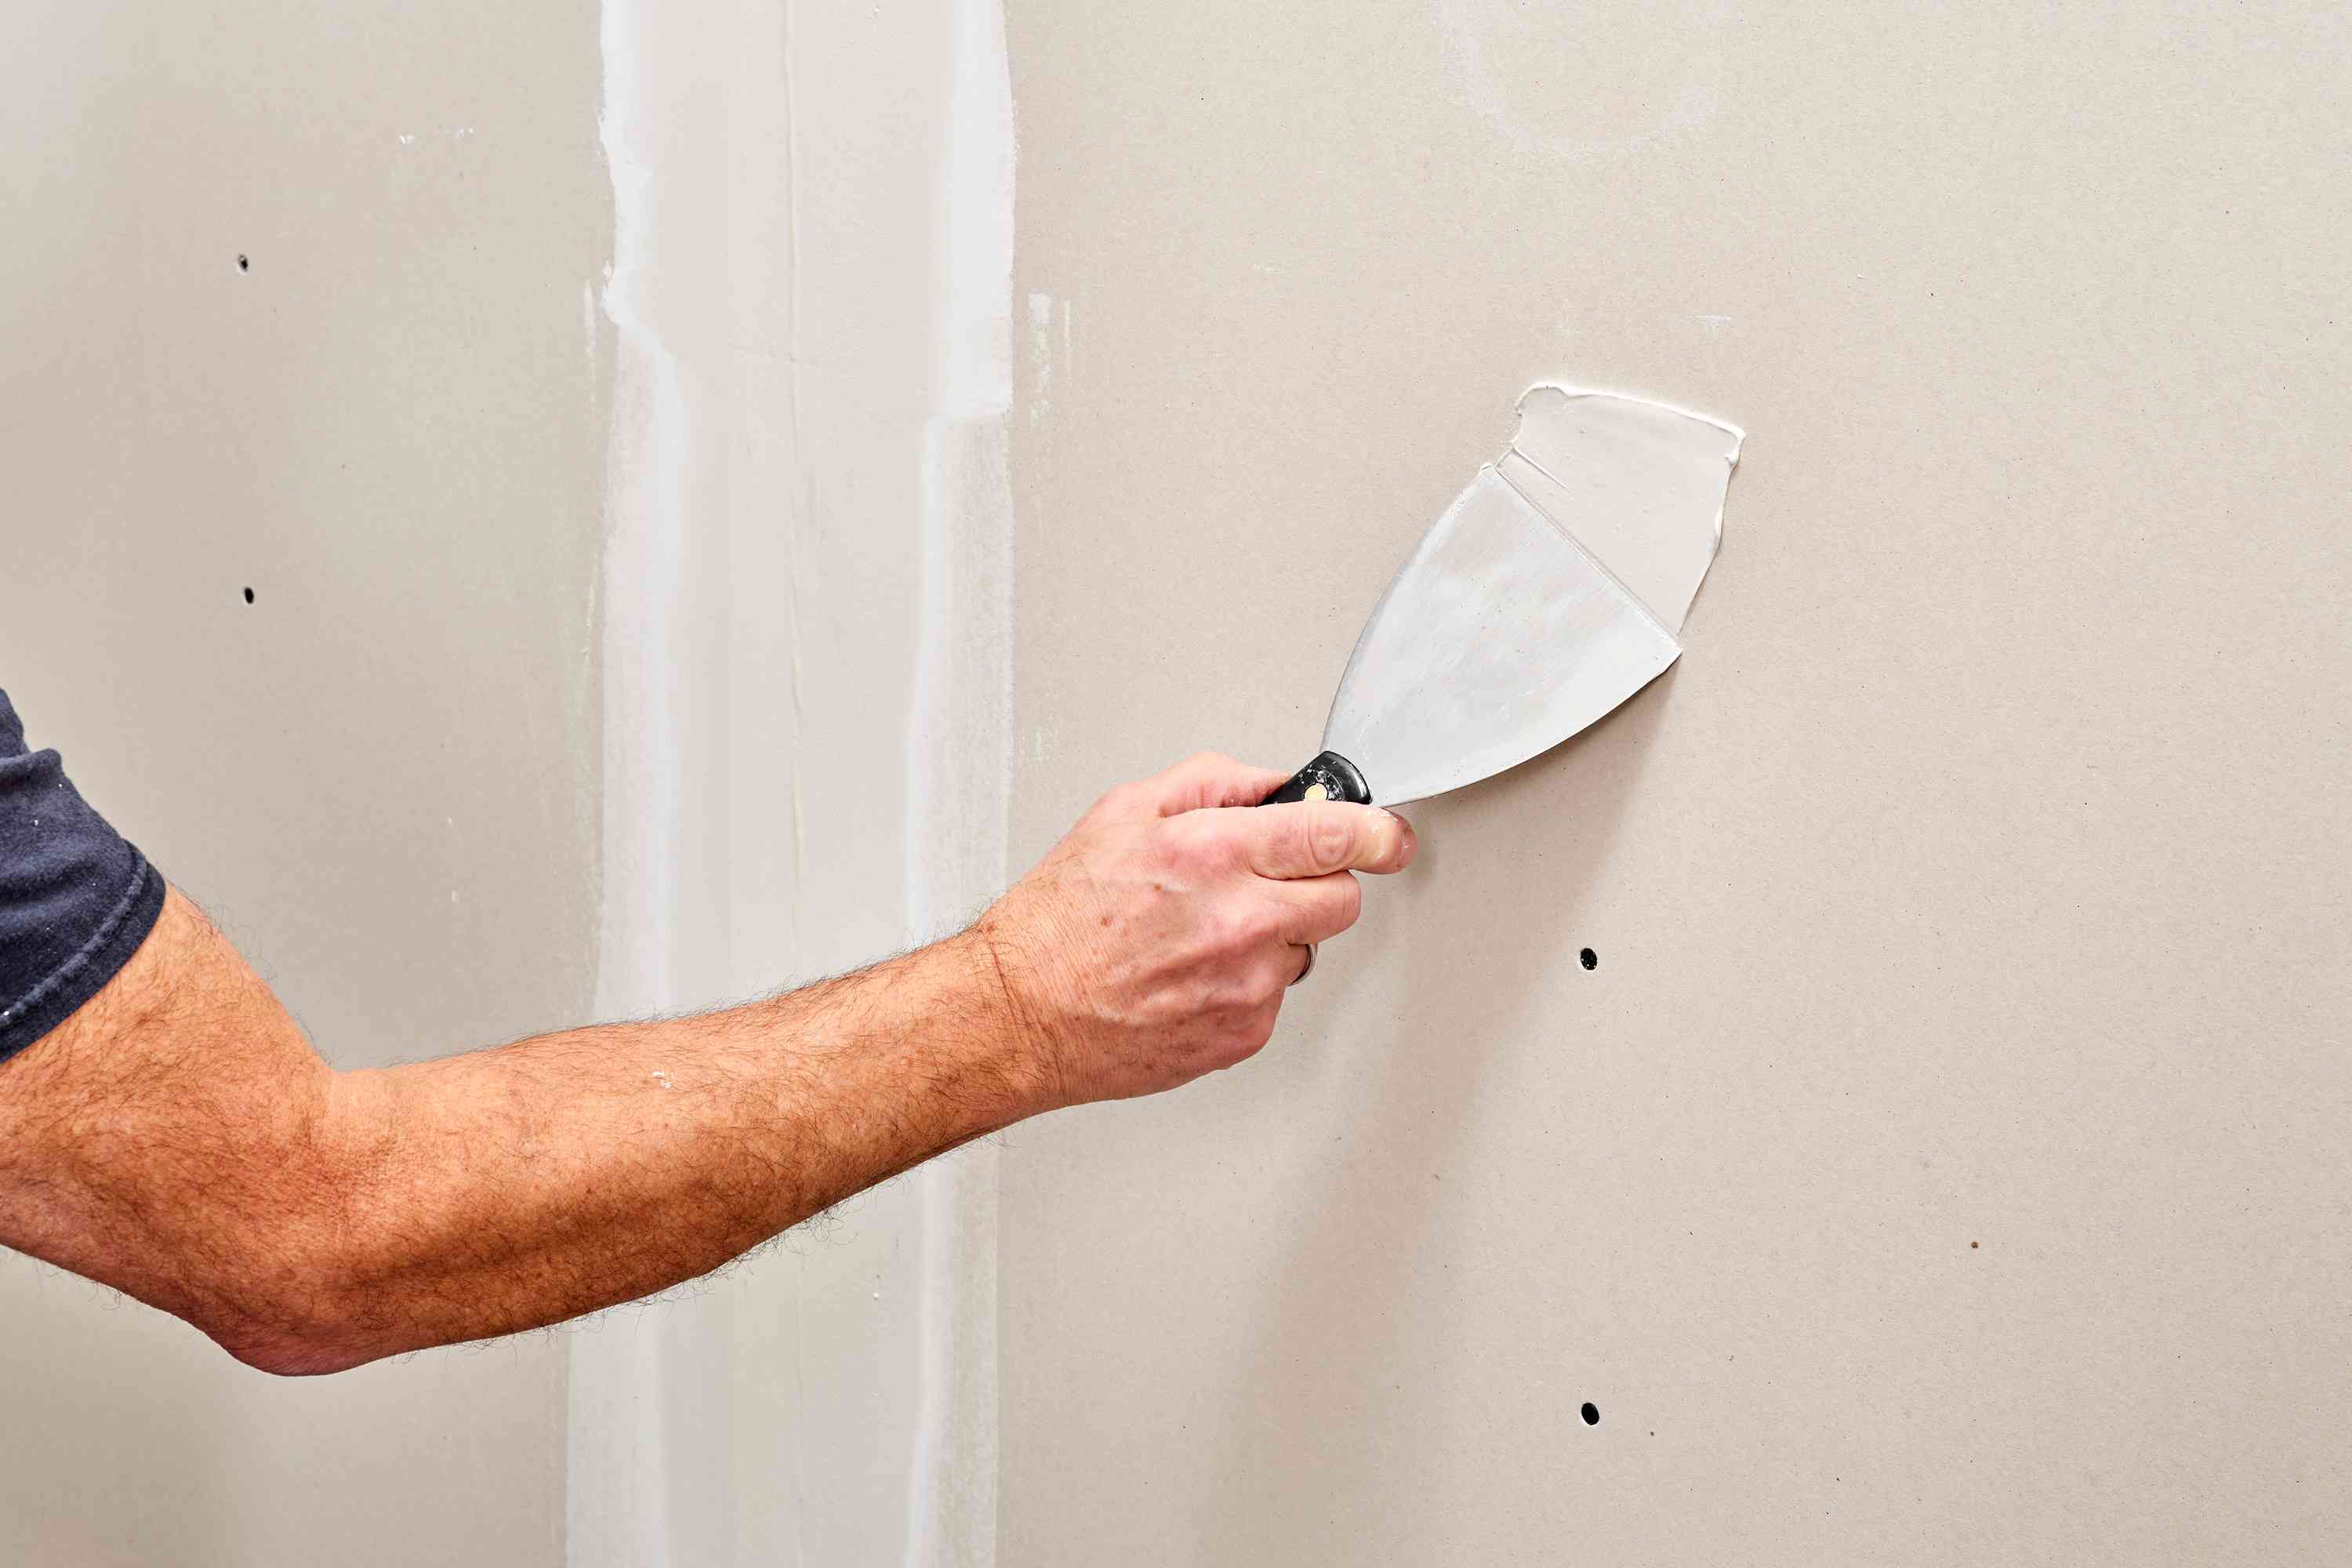 Skibo Services professional applying drywall paste to a drywall screw, ensuring seamless and flawless wall installation.